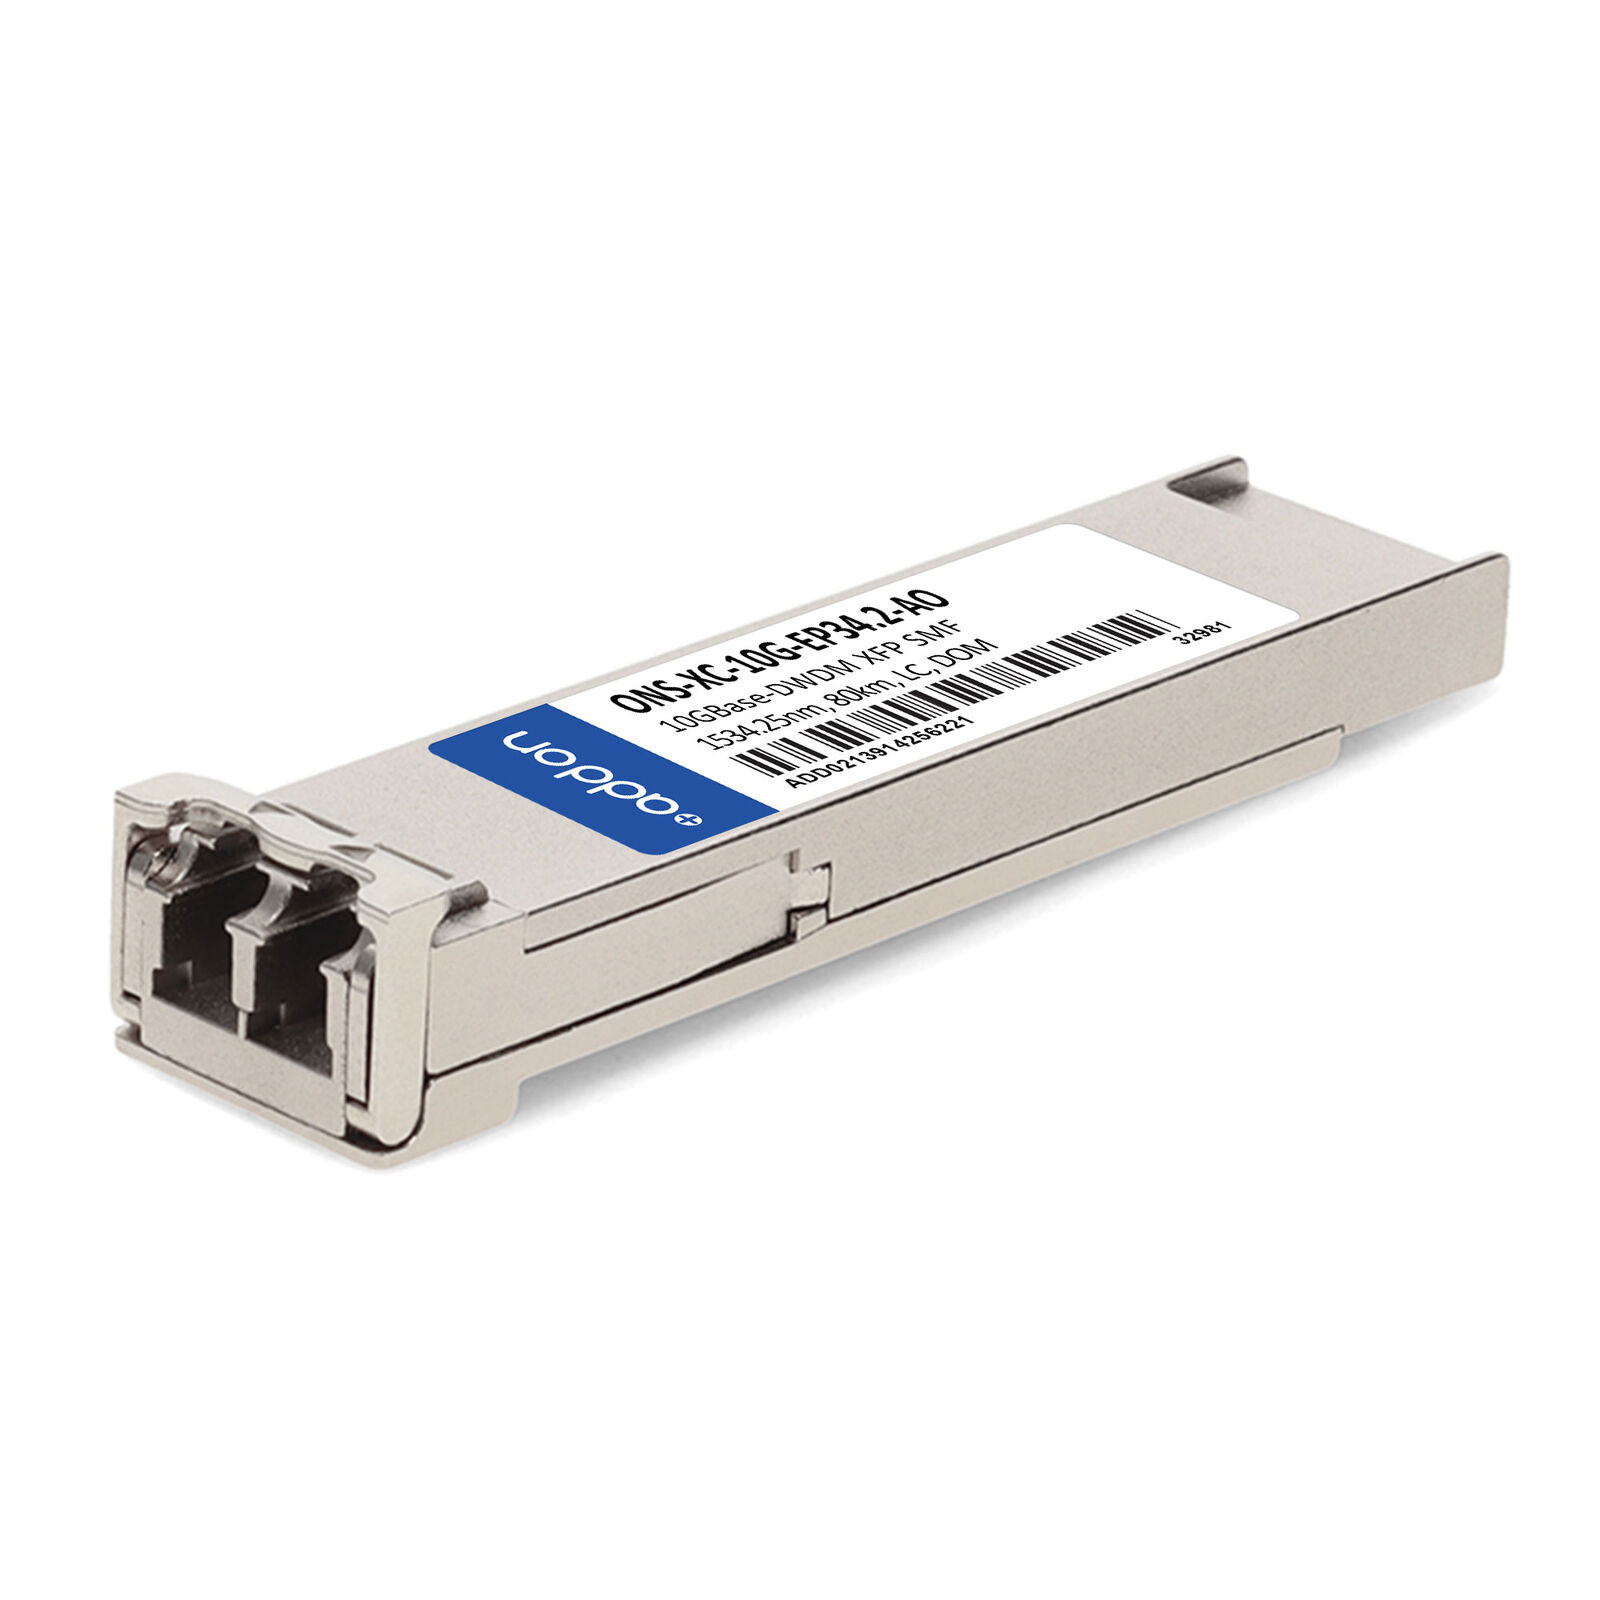 Addon-New-ONS-SC-10G-31-9-AO _ CISCO SFP+ LC ONS-SC+-10G-31.9 COMPAT T